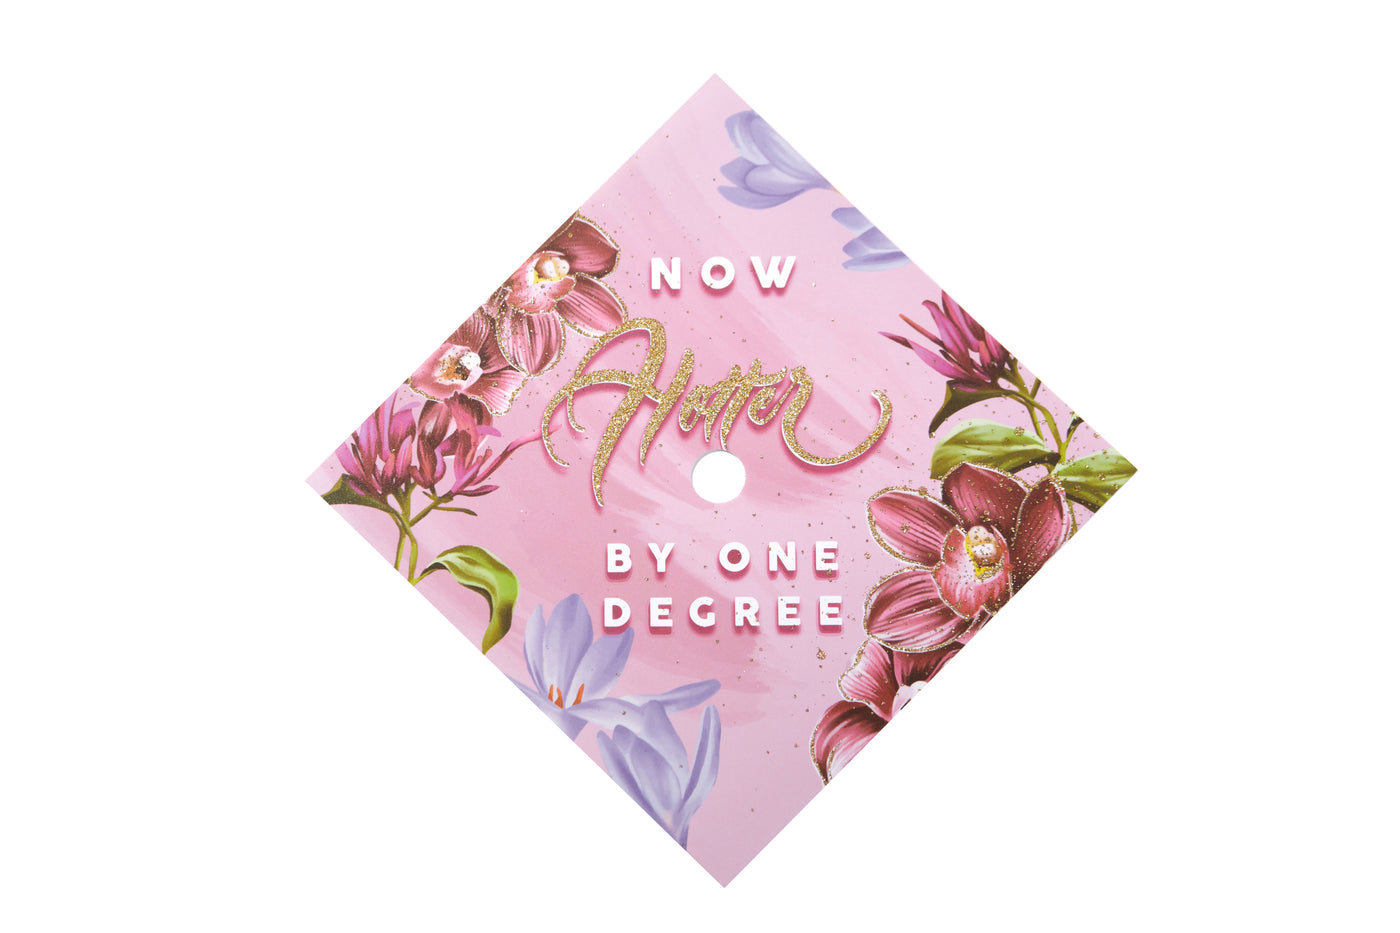 Graduation cap topper art print, Now hotter by one degree